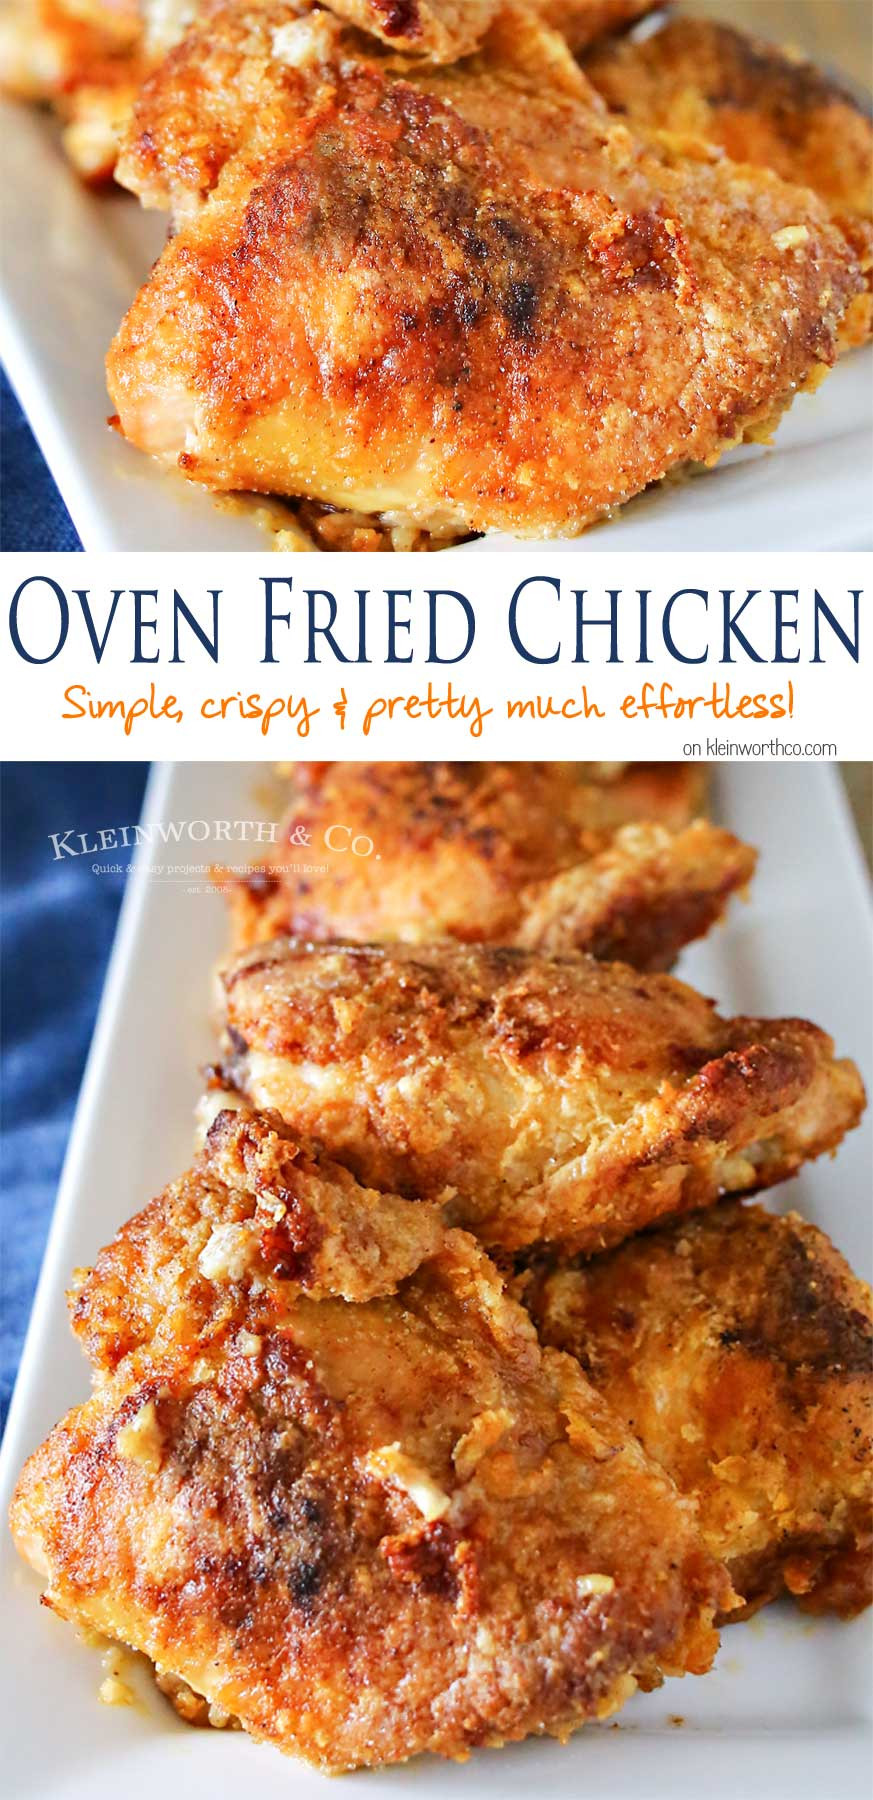 Fried Chicken In The Oven
 Oven Fried Chicken Kleinworth & Co